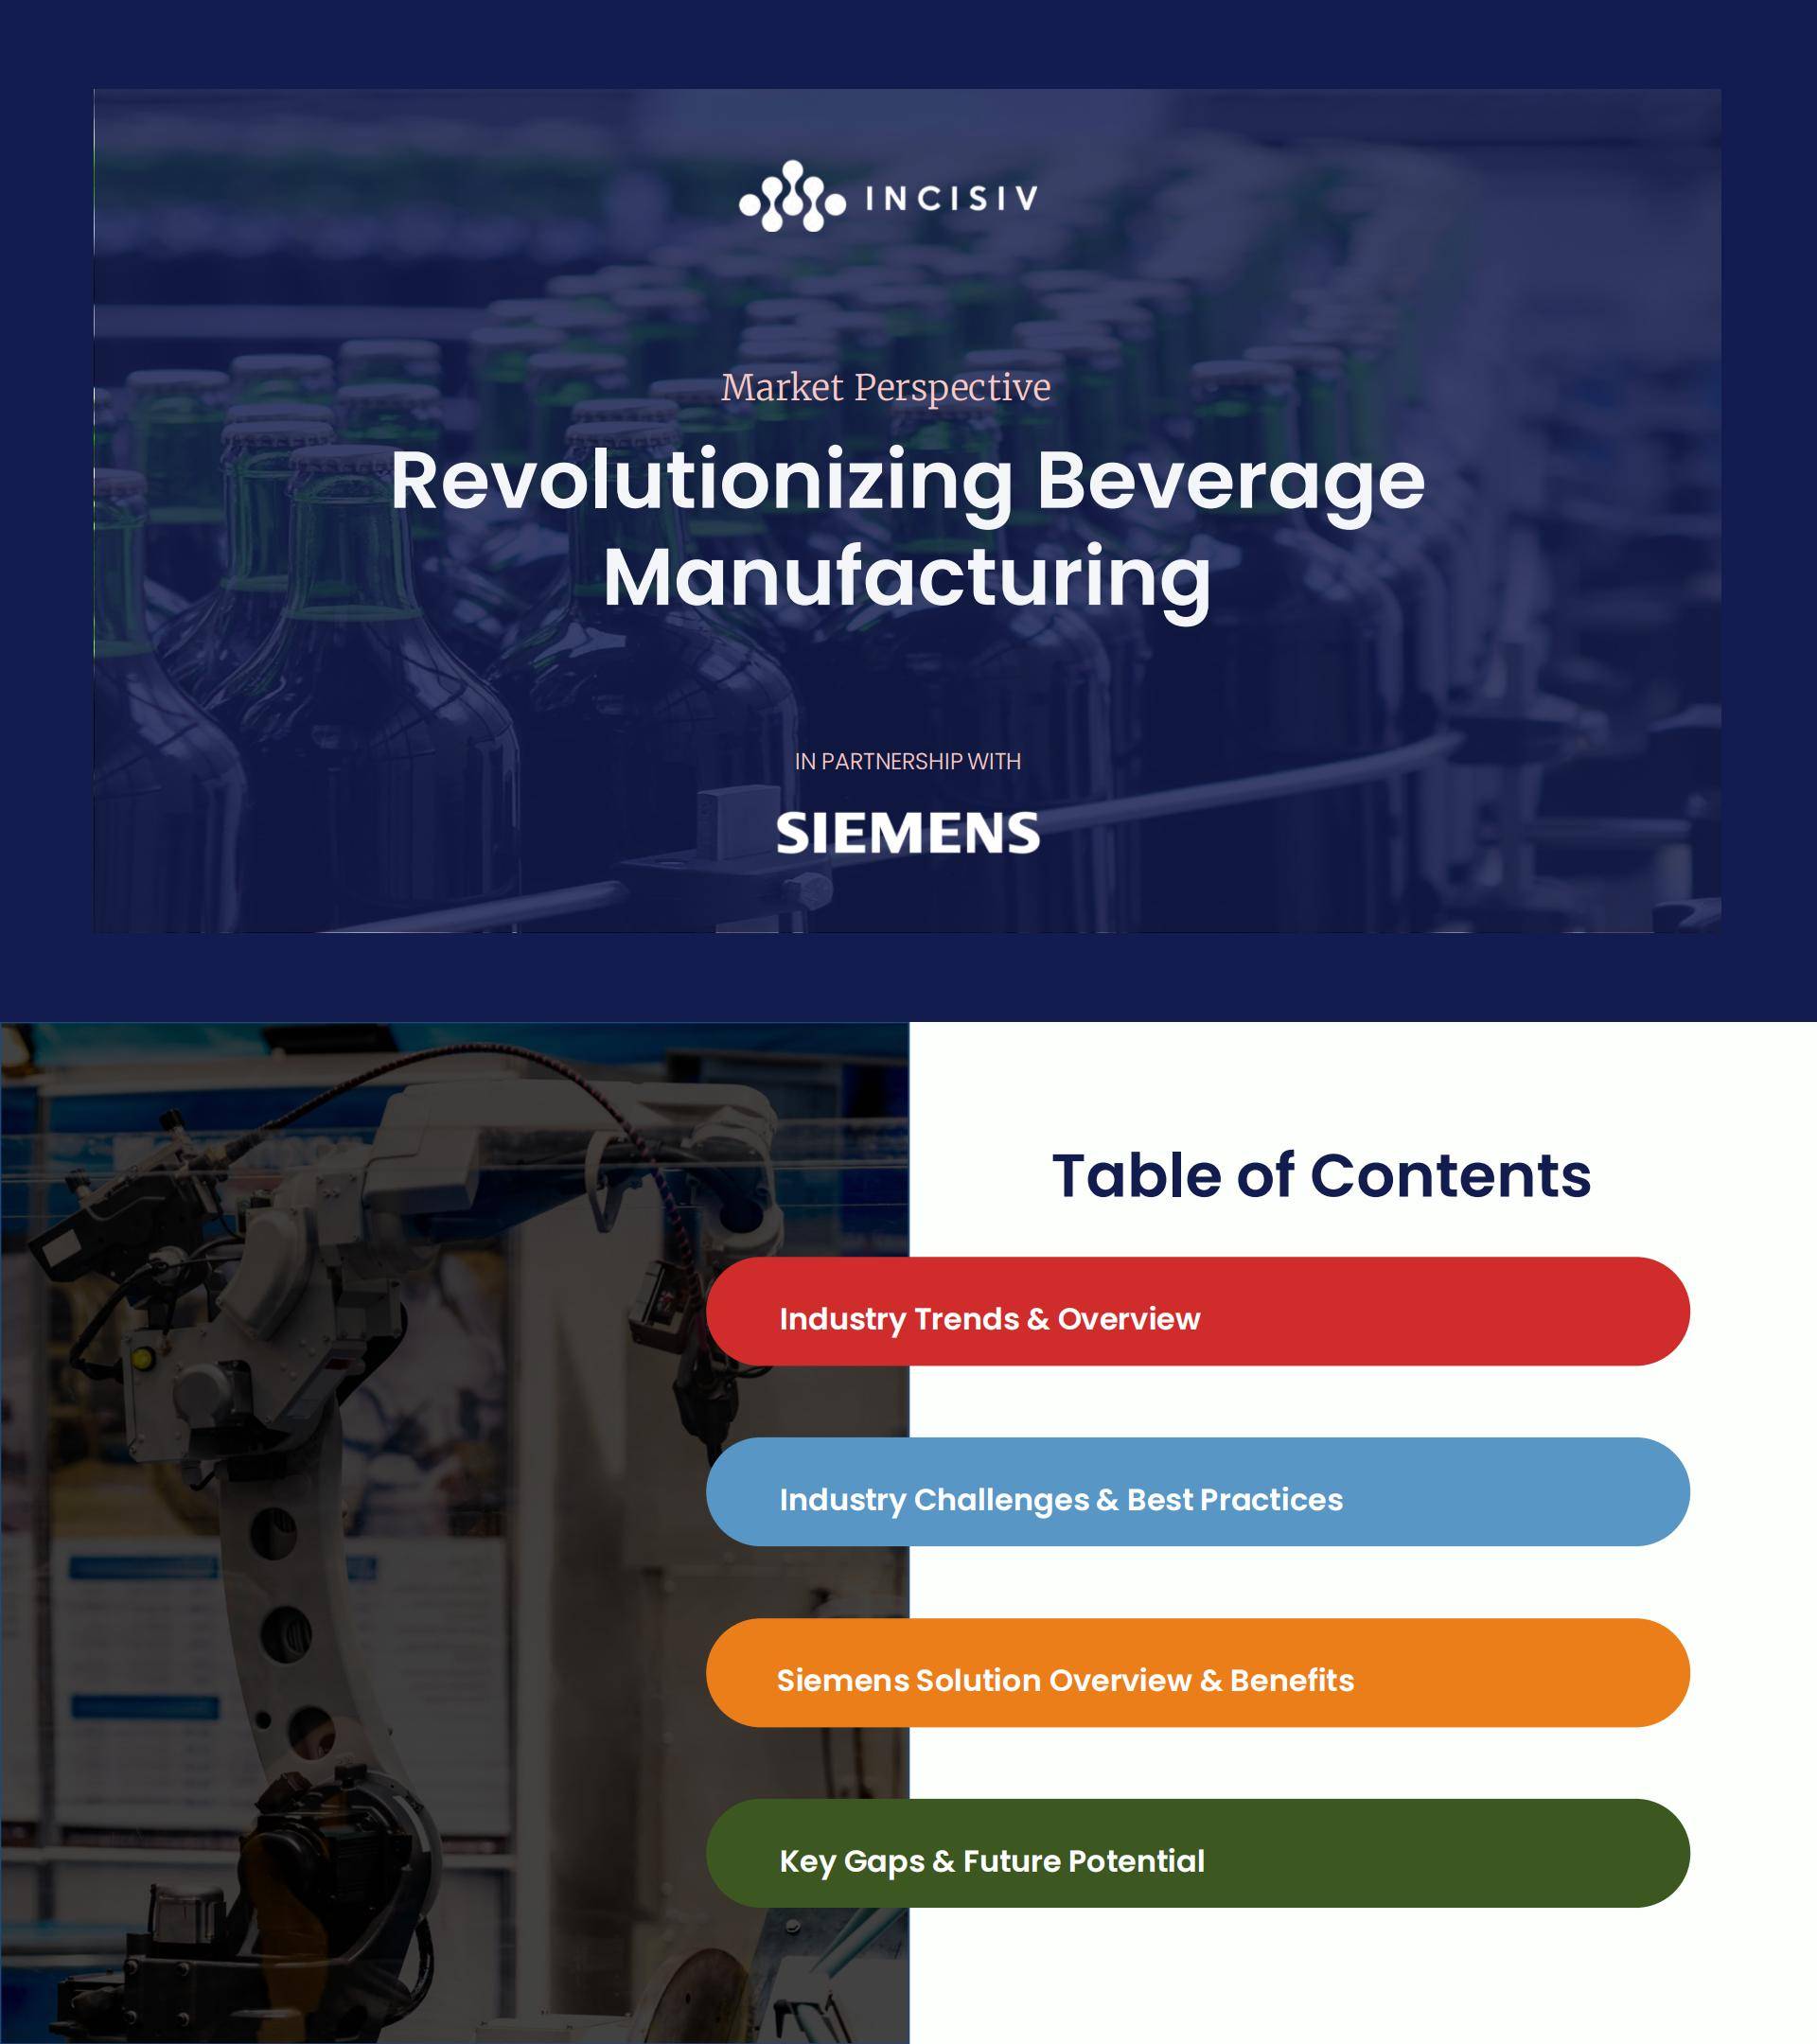 Advanced strategies in brewing and beverage manufacturing